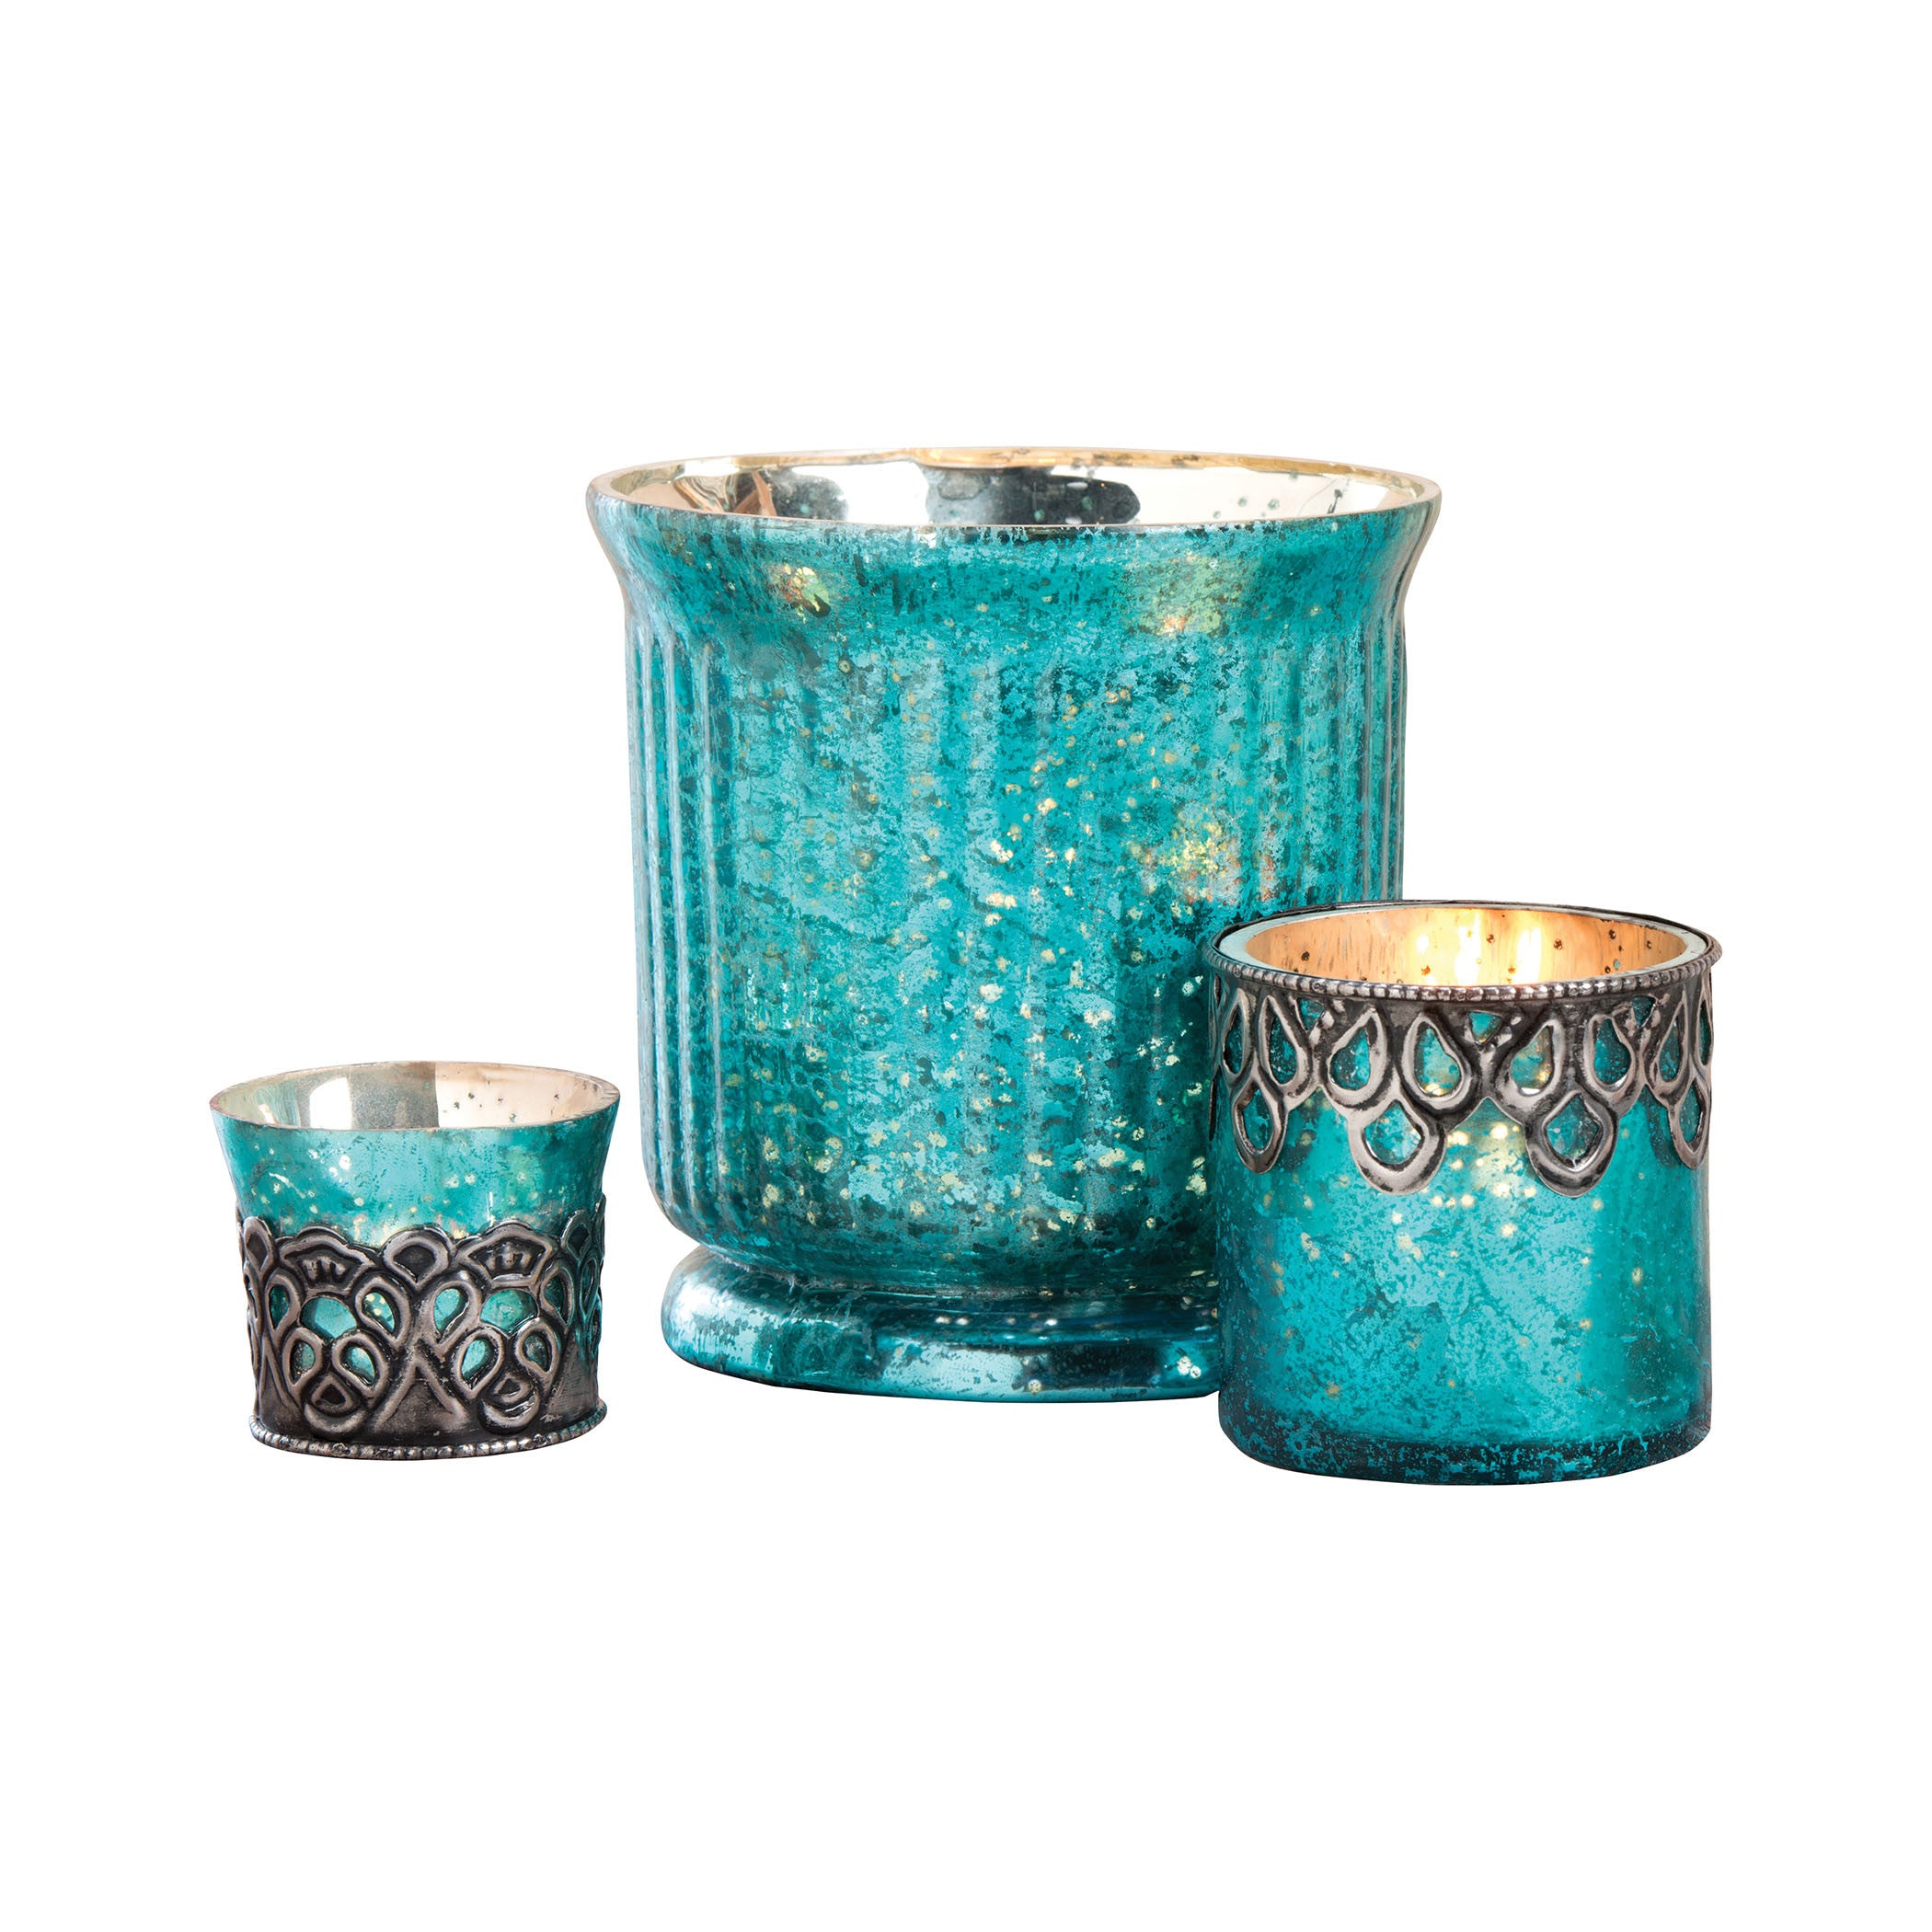 Pomeroy Pom-571527 Audrey Collection Antique Turquoise Artifact,silver Finish Candle/candle Holder